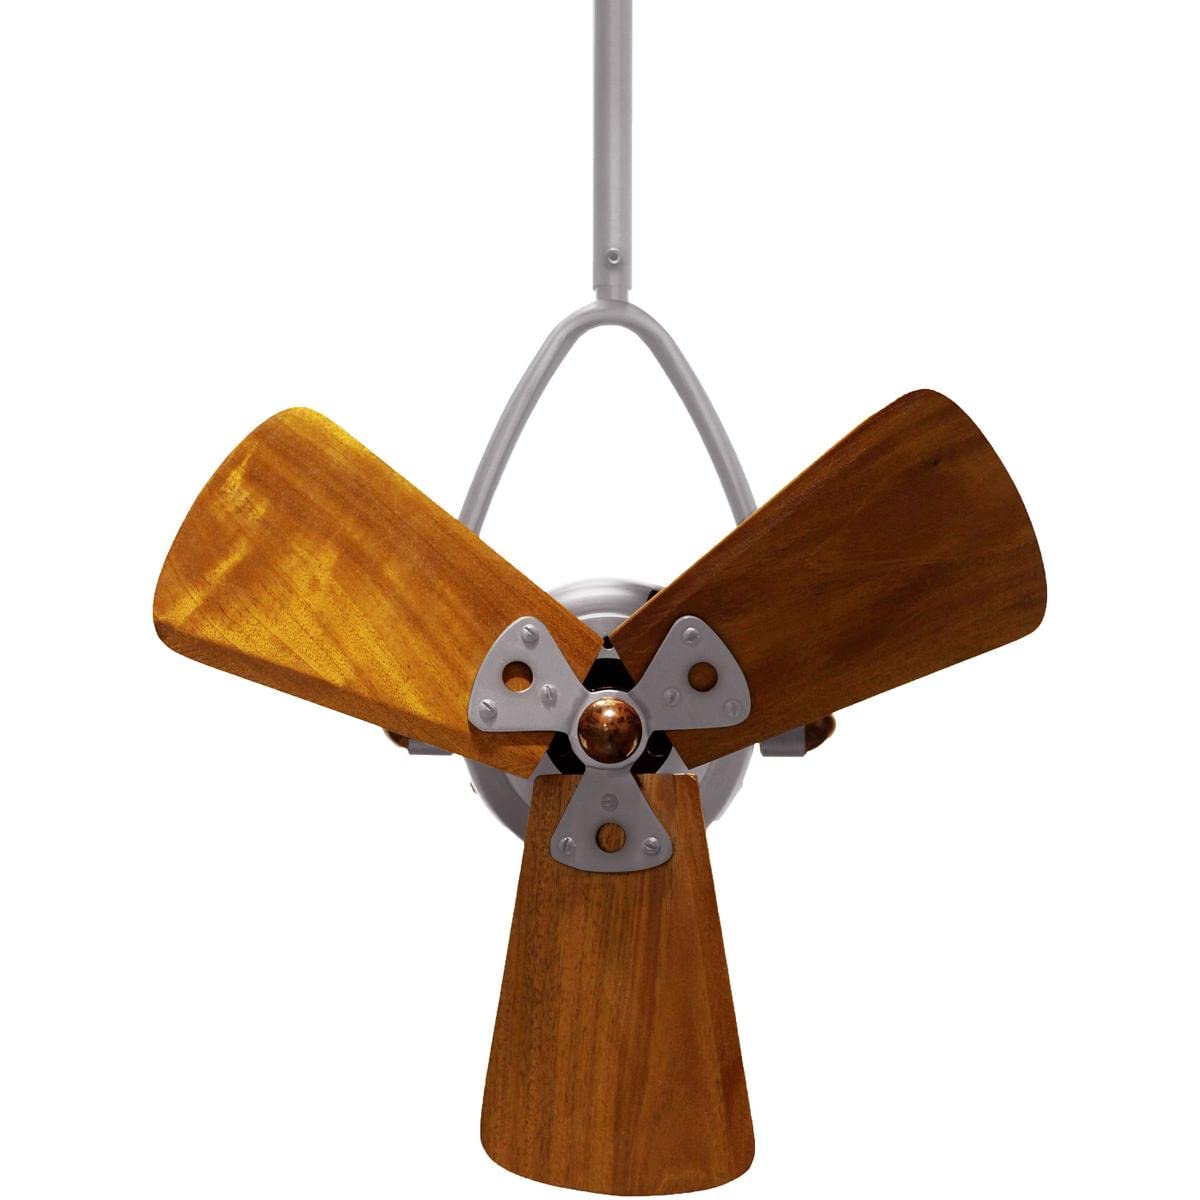 Matthews Fan JD-BN-WD Jarold Direcional ceiling fan in Brushed Nickel finish with solid sustainable mahogany wood blades.